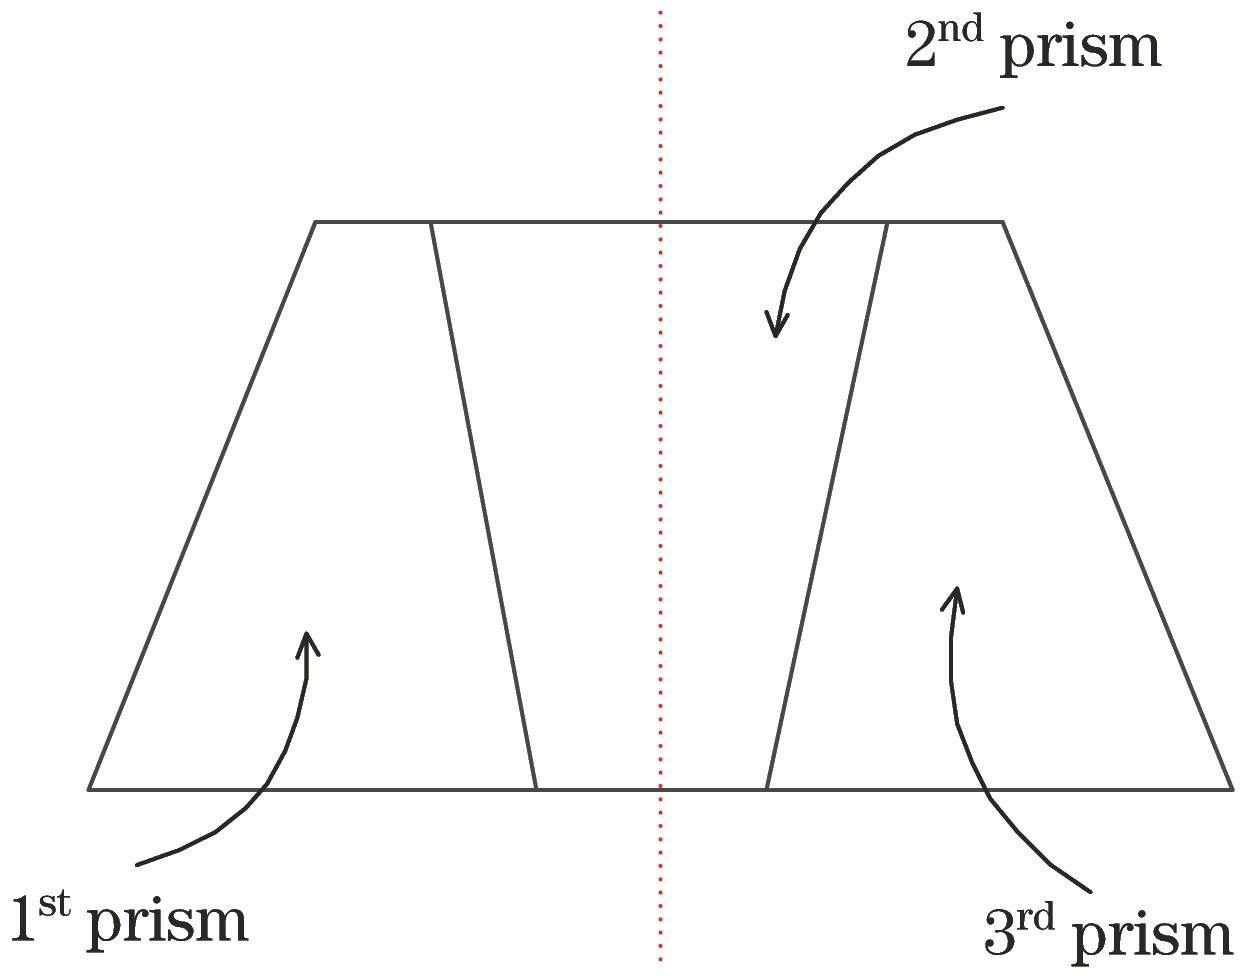 Structure diagram of double Amici prism